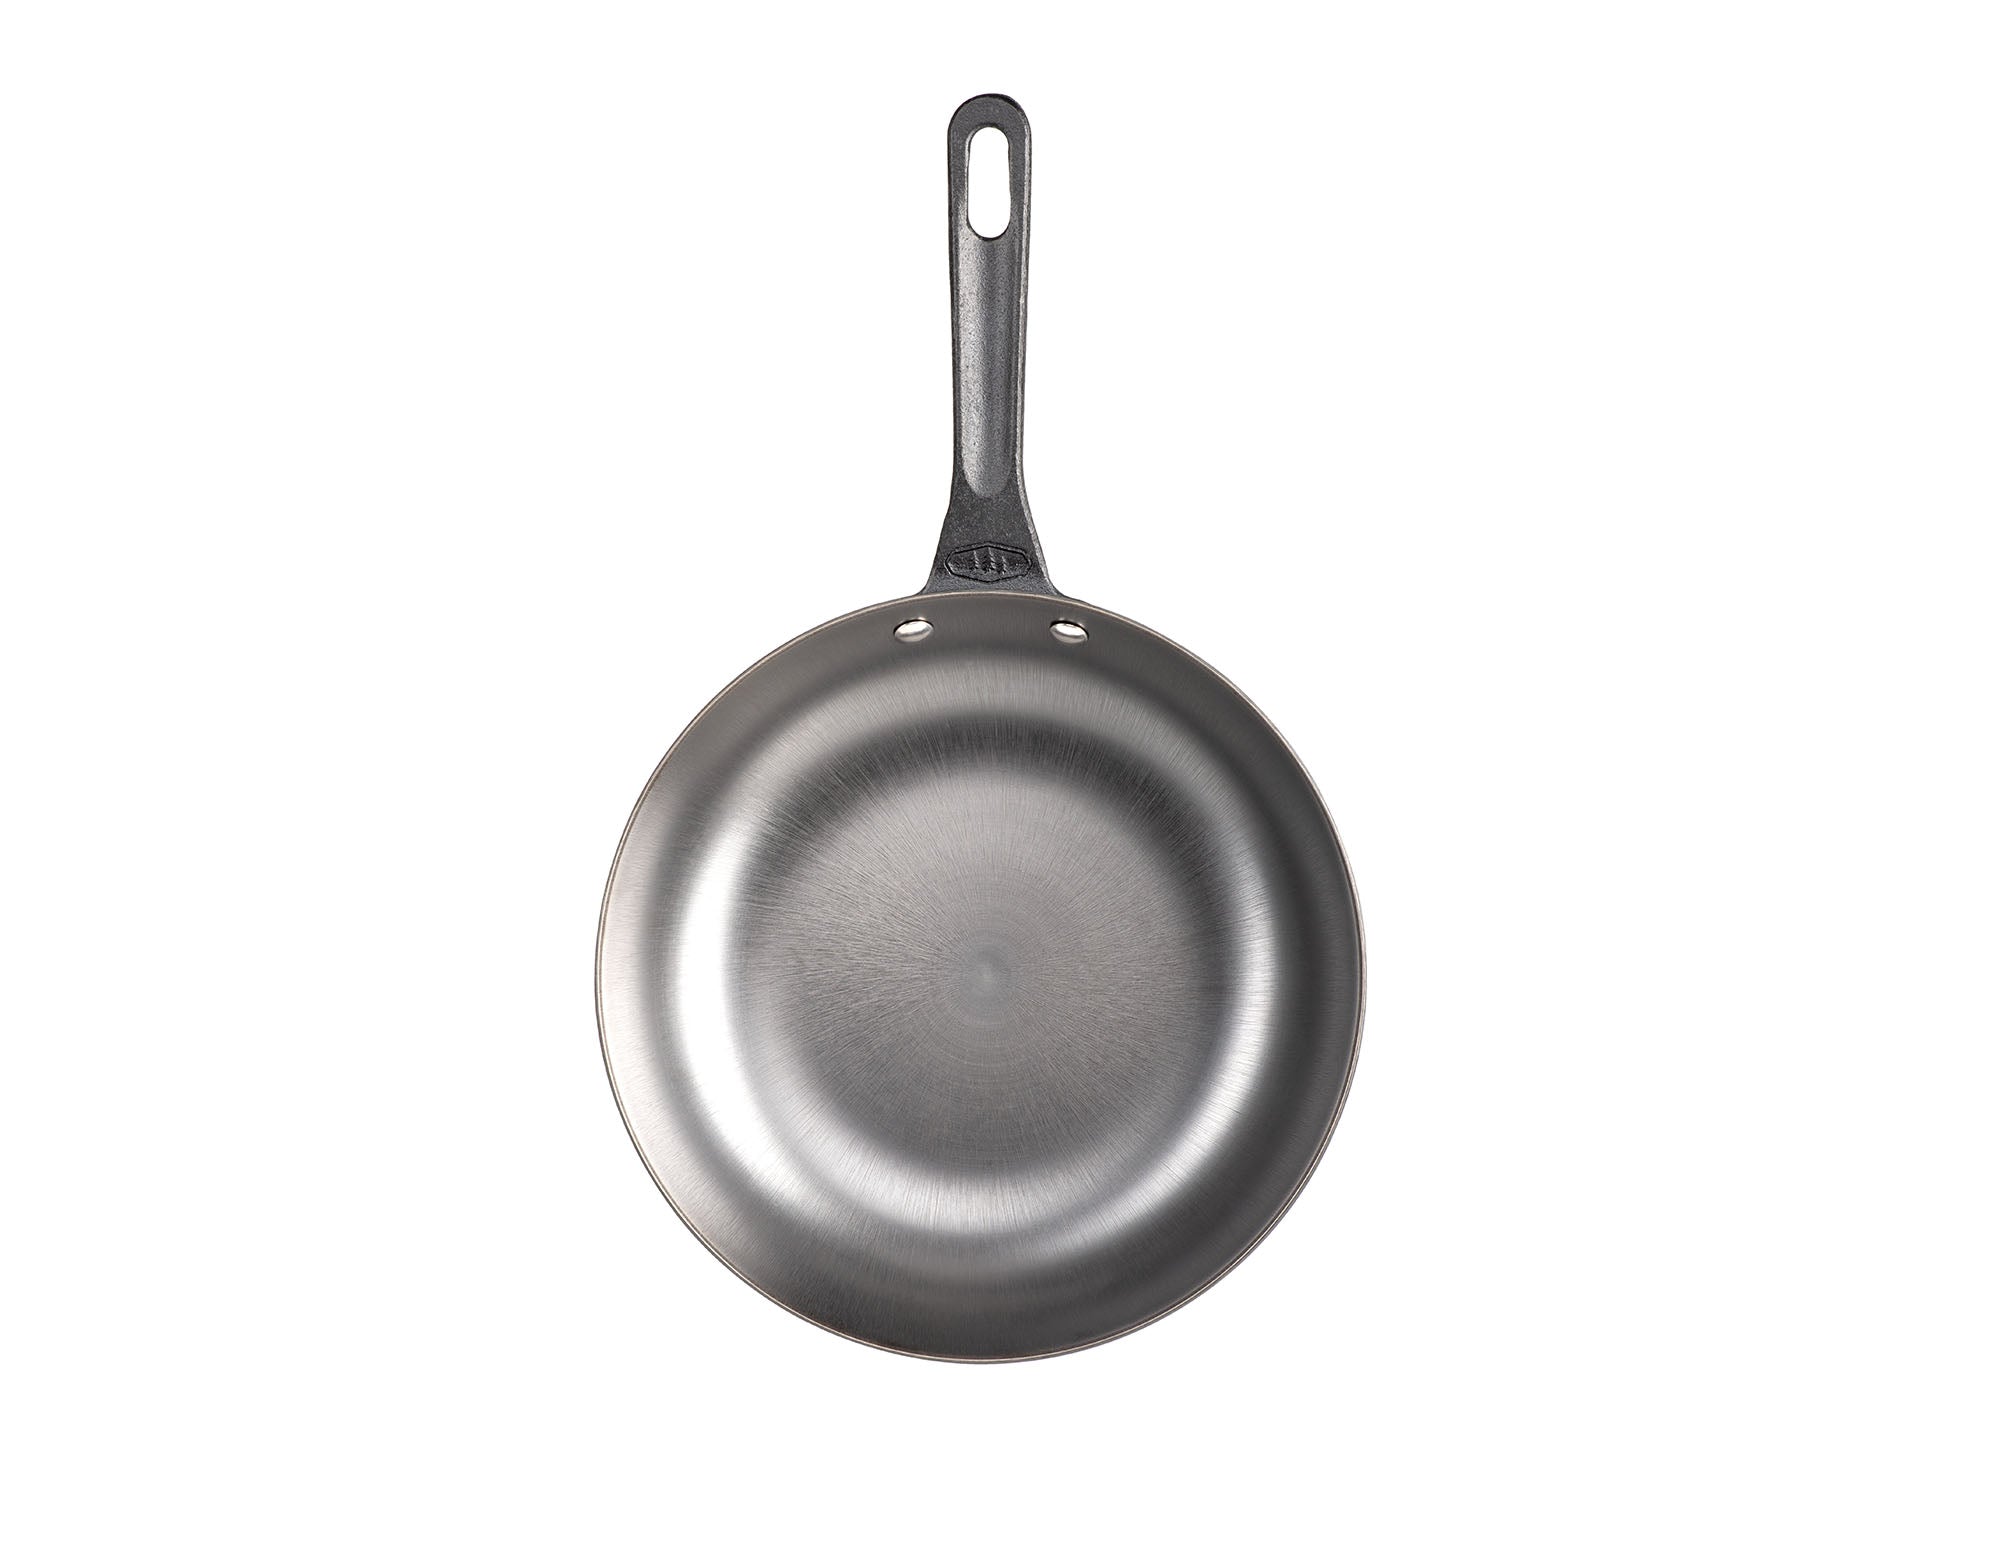 GUIDECAST 10 inch Frying Pan